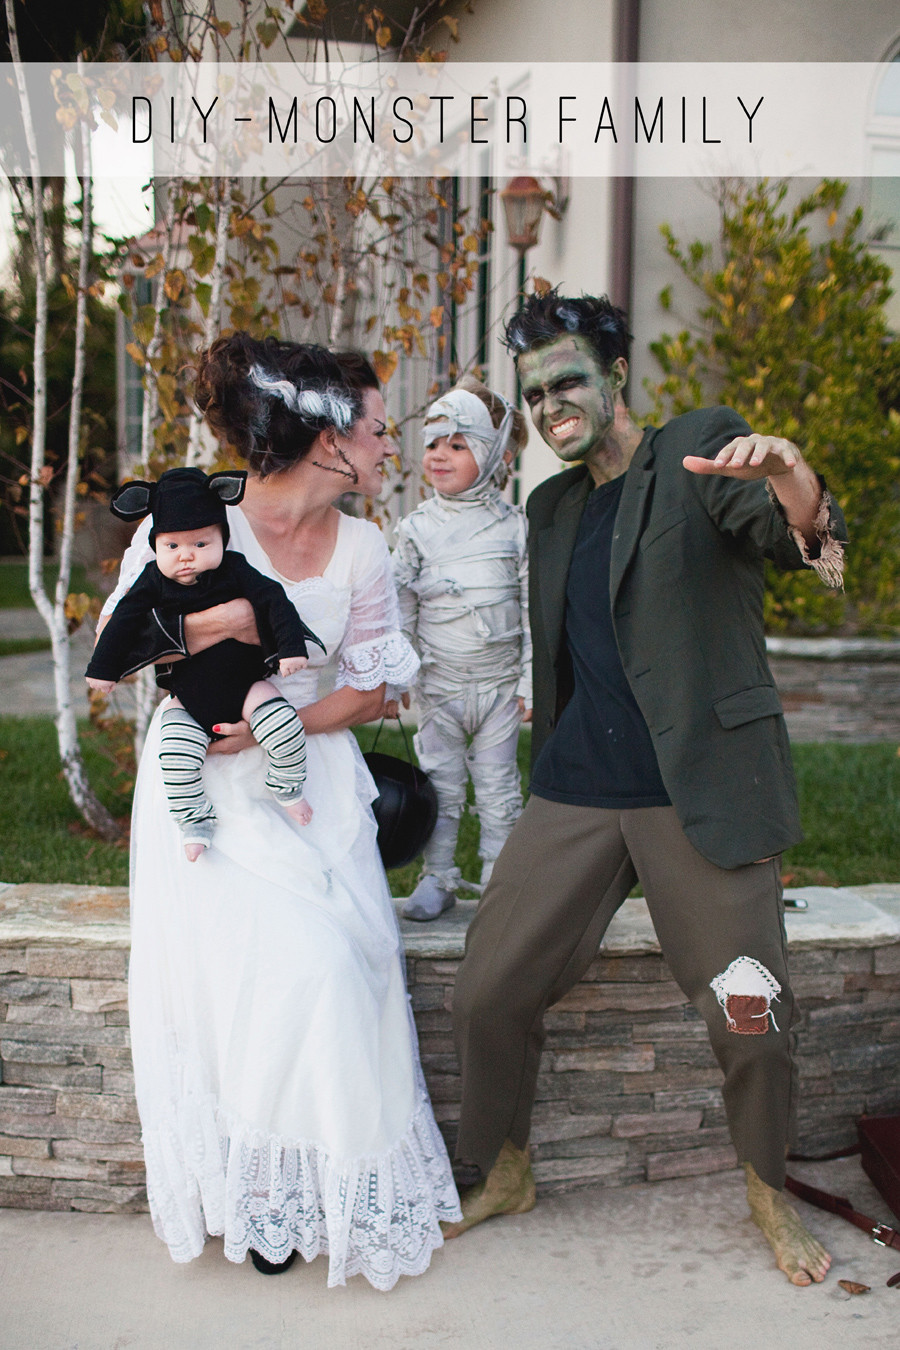 DIY Family Costumes
 TELL MONSTER FAMILY COSTUME DIY Tell Love and PartyTell